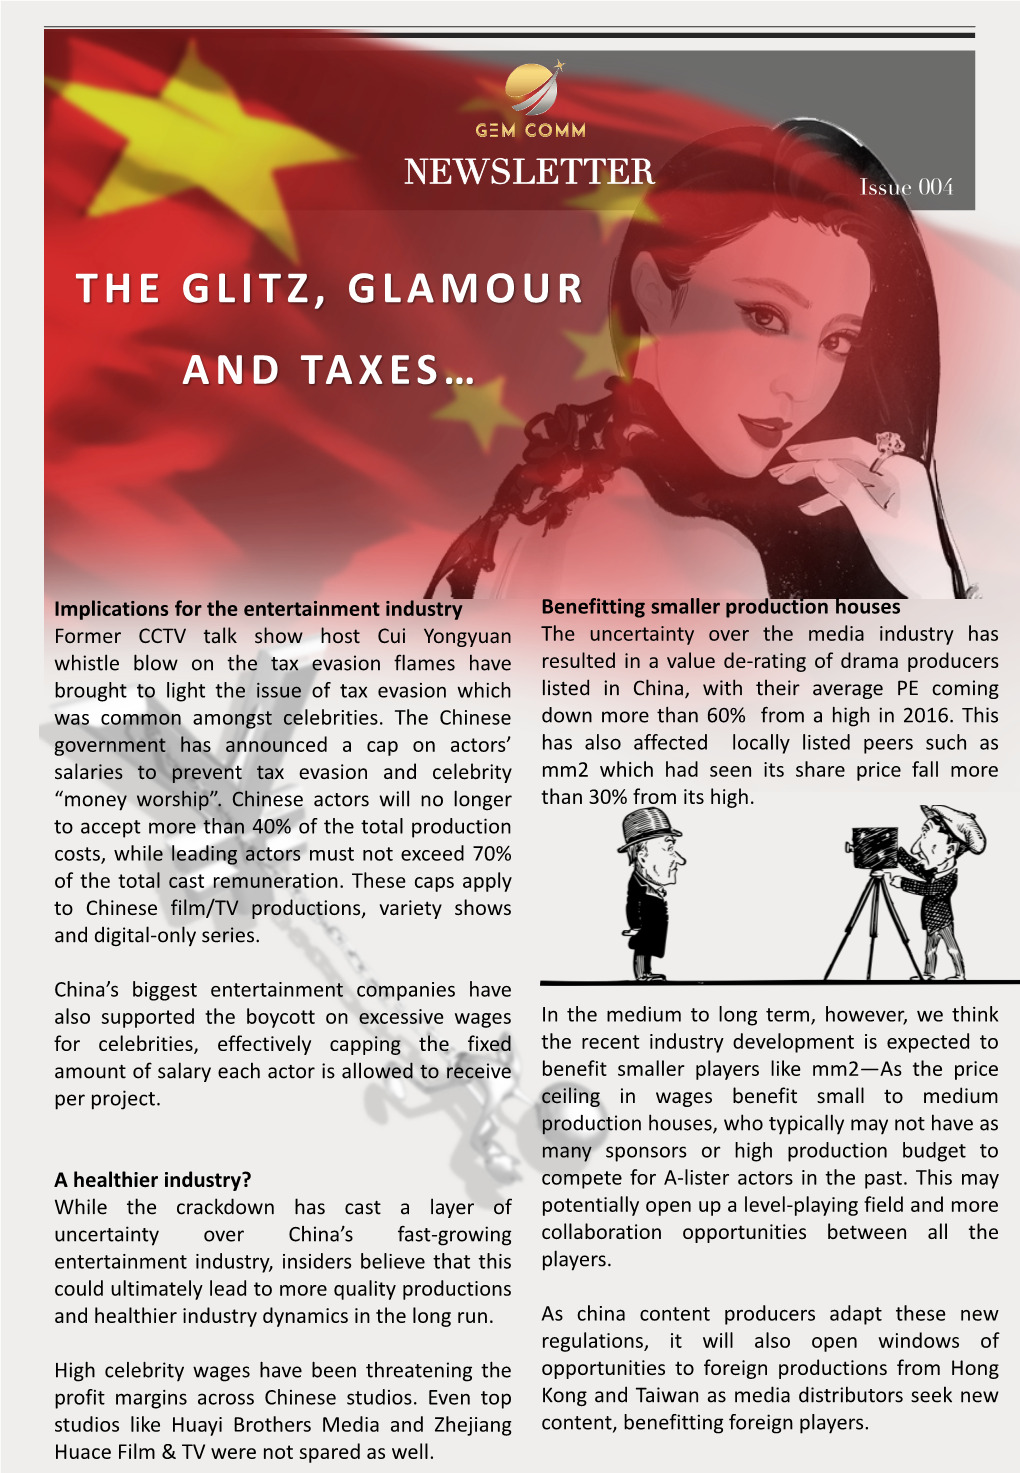 The Glitz, Glamour and Taxes…